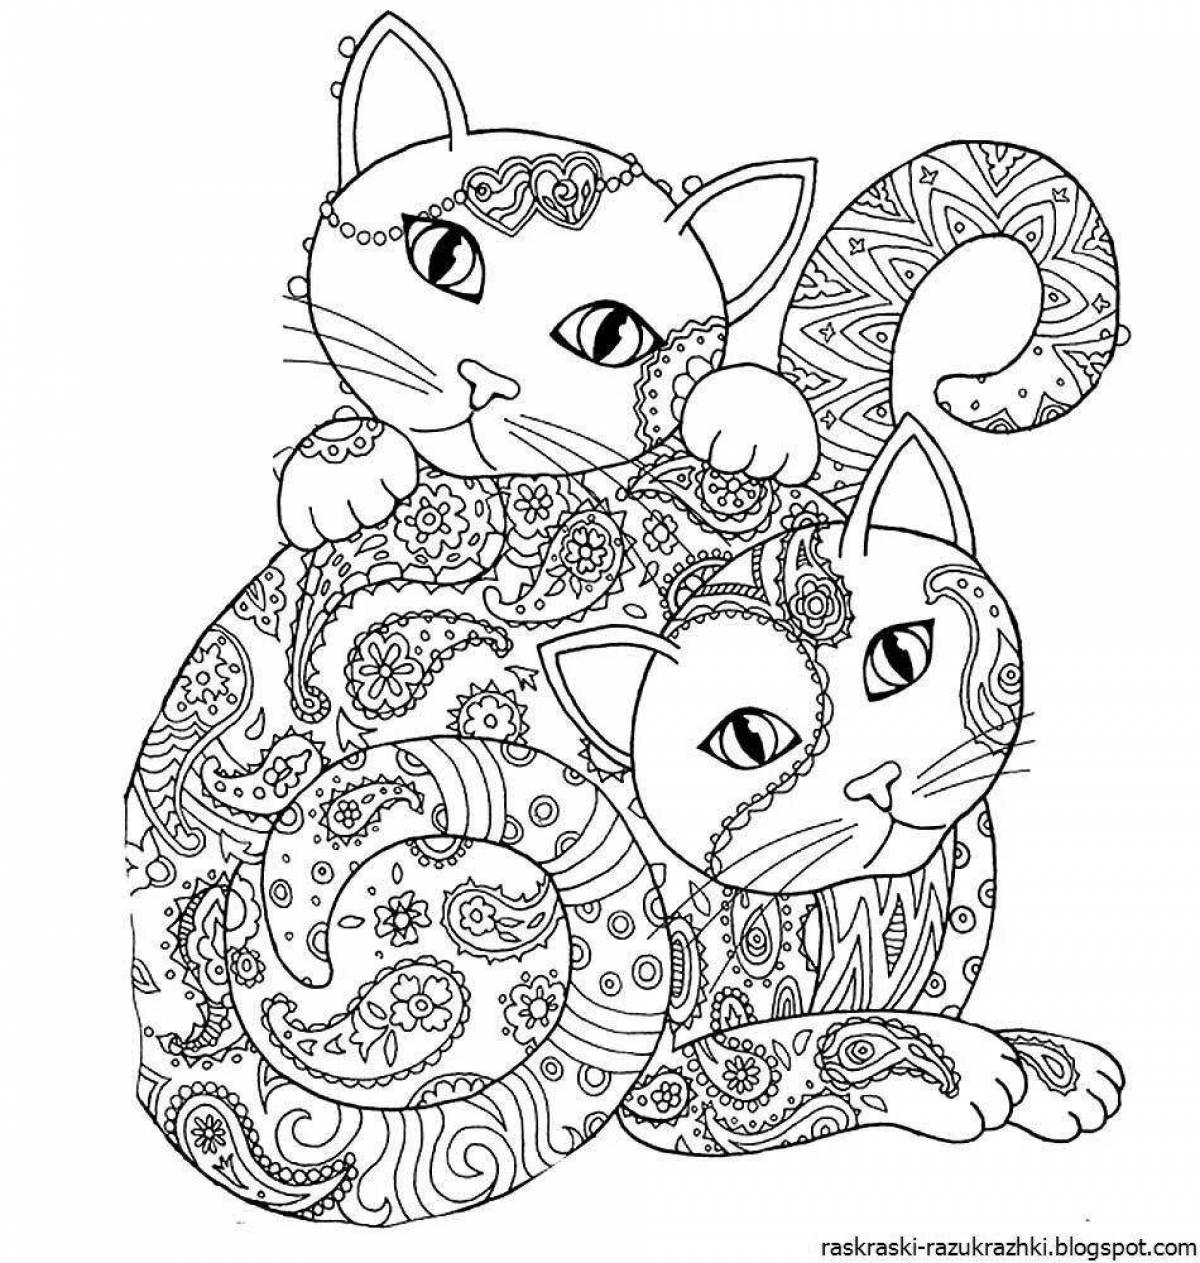 Amazing coloring pages for girls 11 years old with animals